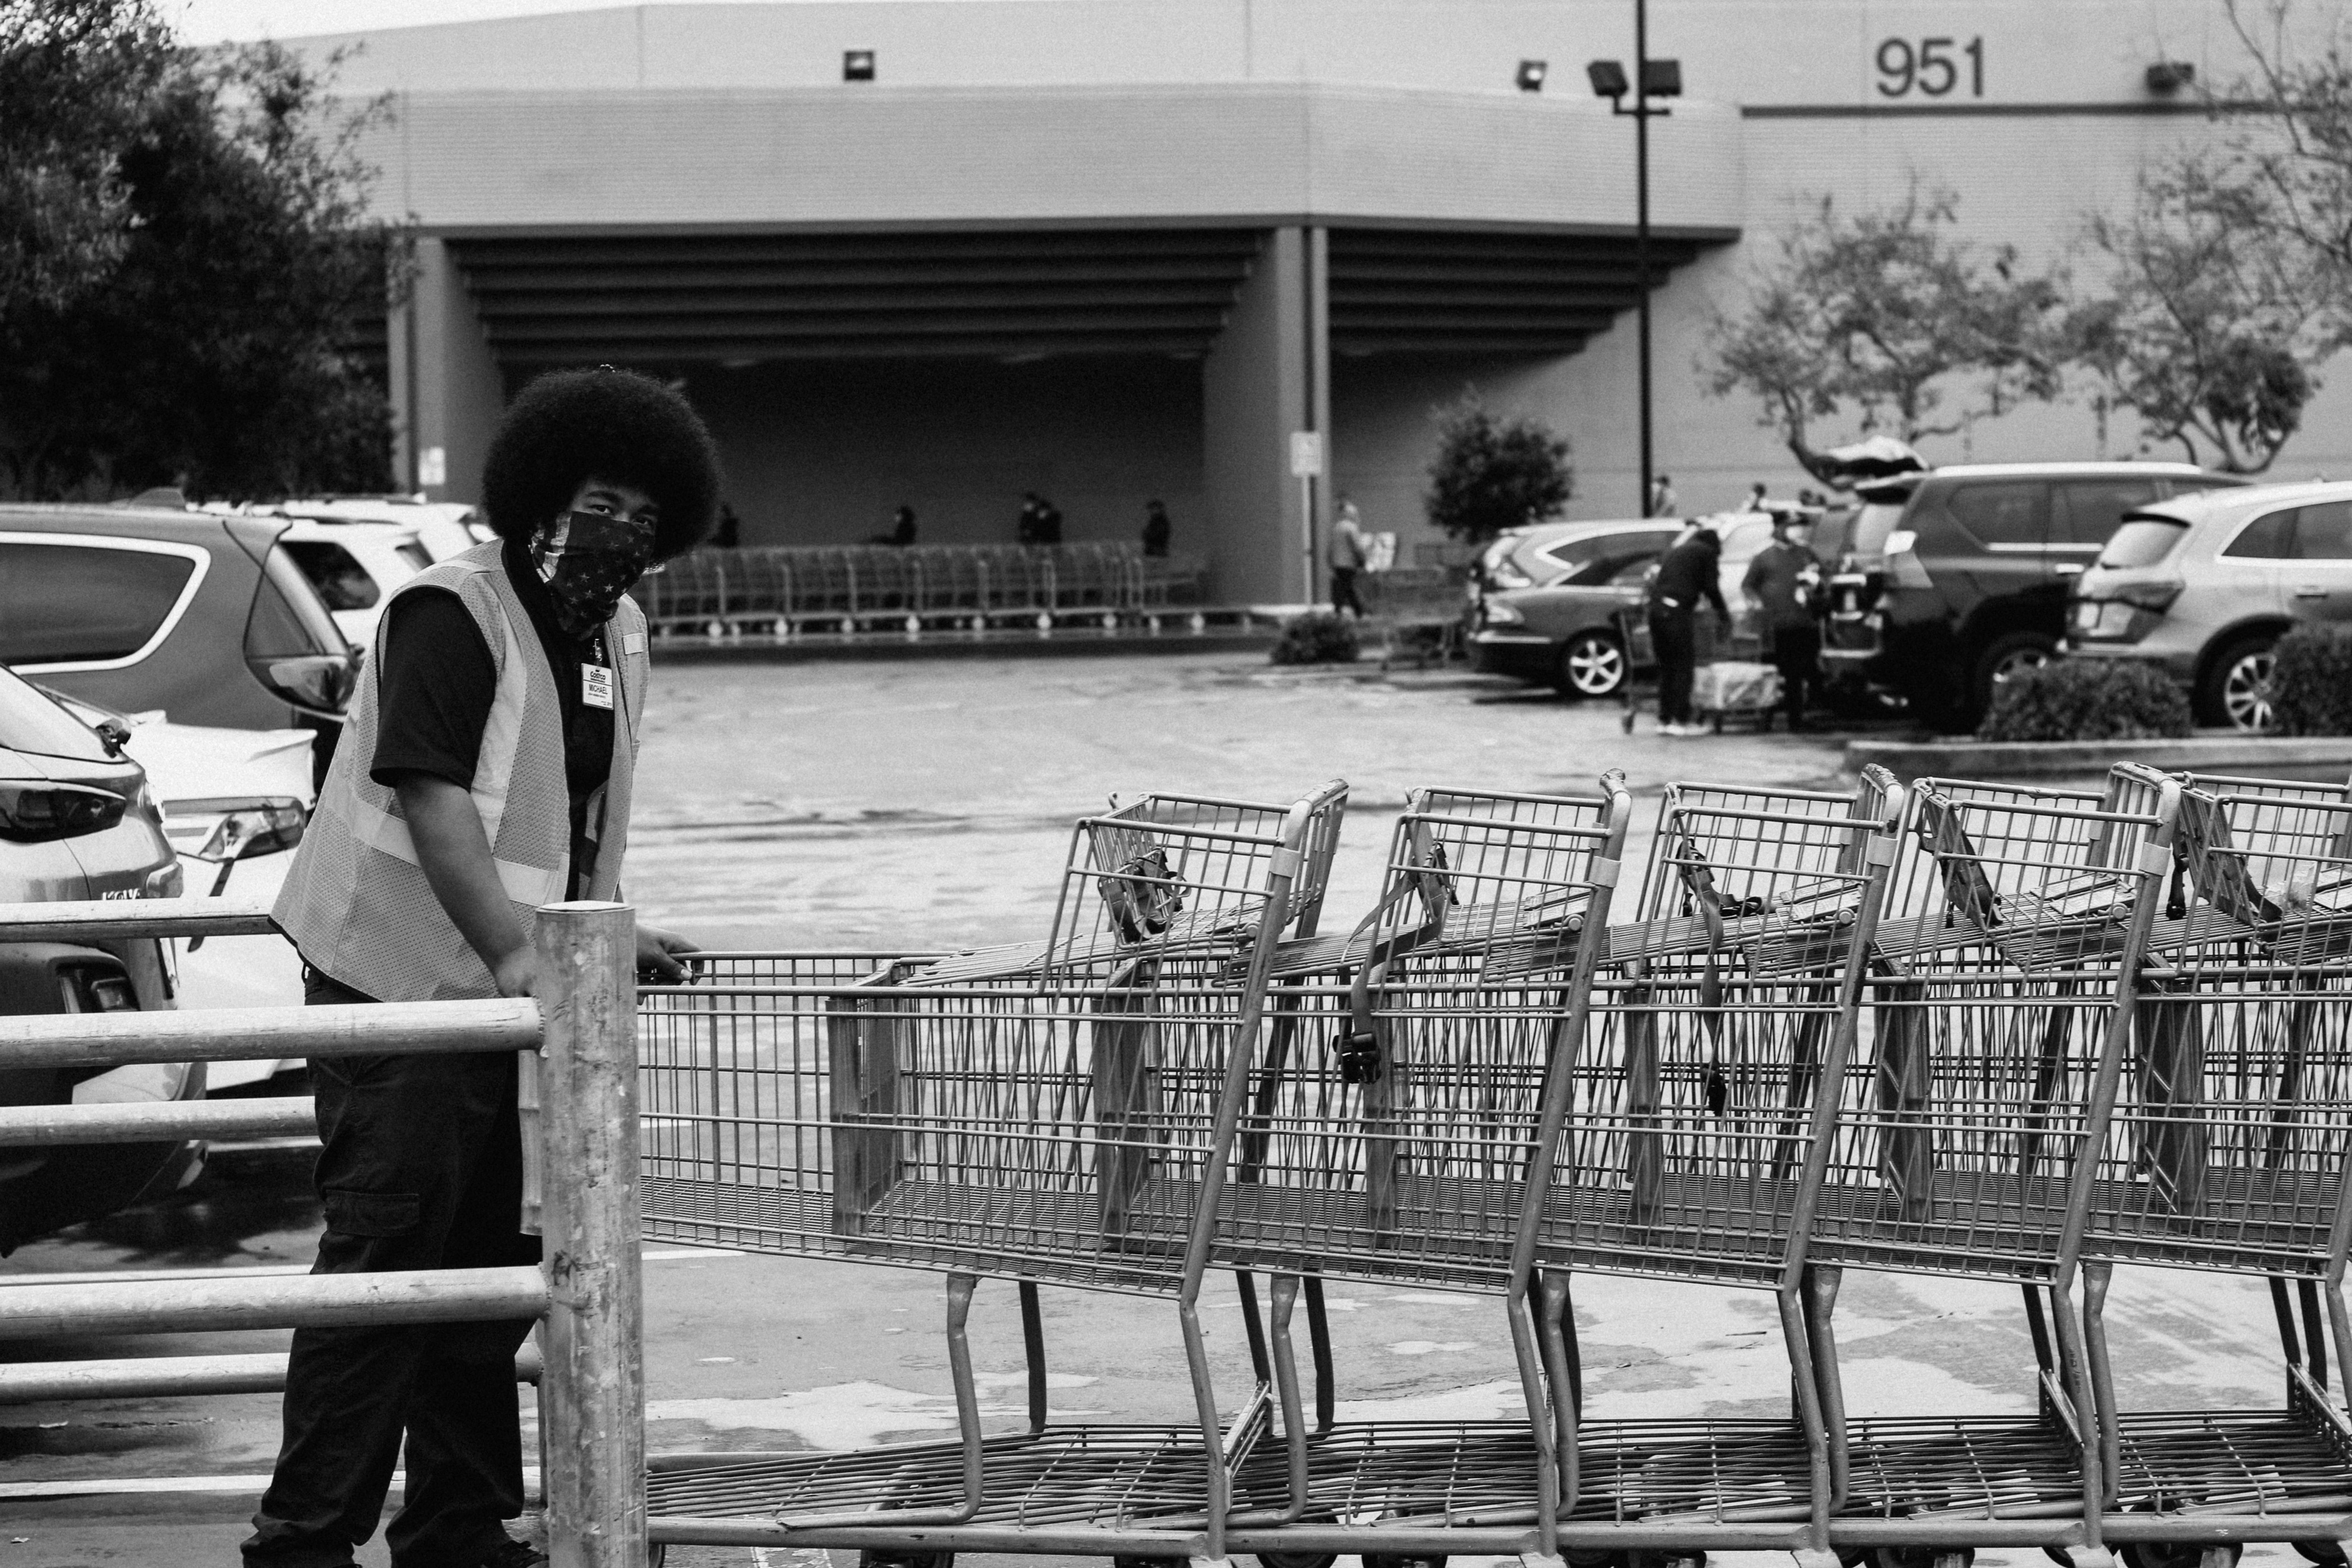 A black man, wearing safety vest and mask made from a bandana, pushes a line of grocery carts in a parking lot